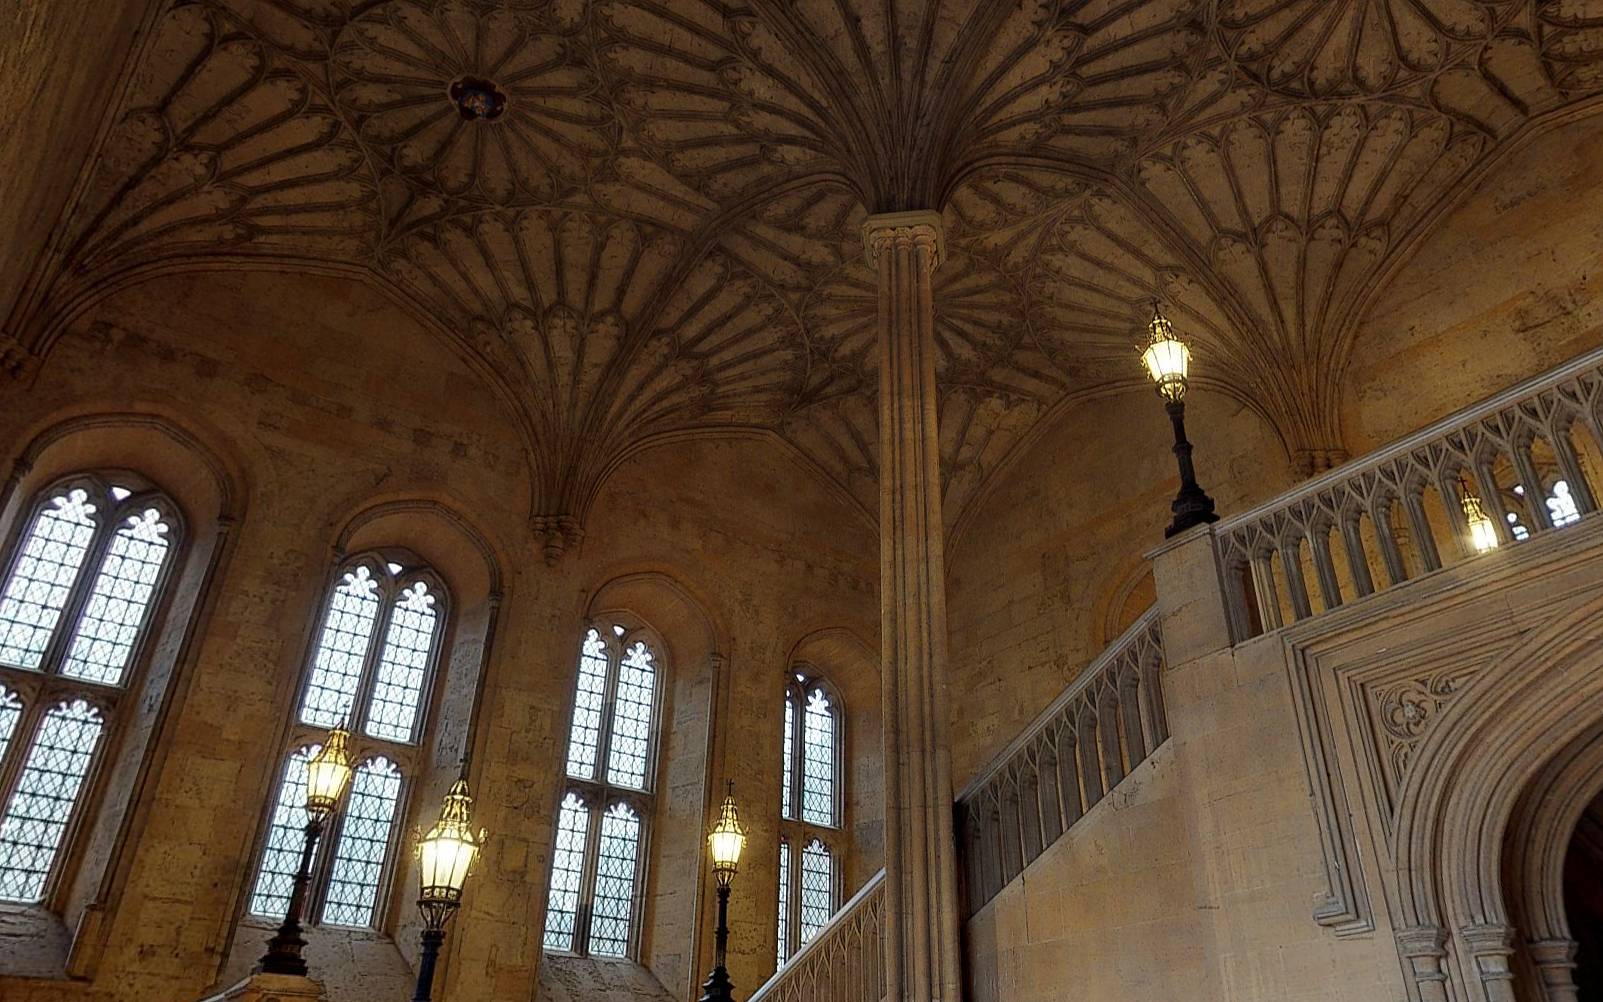 Lanier Theological Library Conference Center was inspired by the Church of Christ in Oxford, England. From the moment visitors step into the room, their gaze is immediately captivated by the awe-inspiring magnificence of the Euro-style Gothic ceiling.